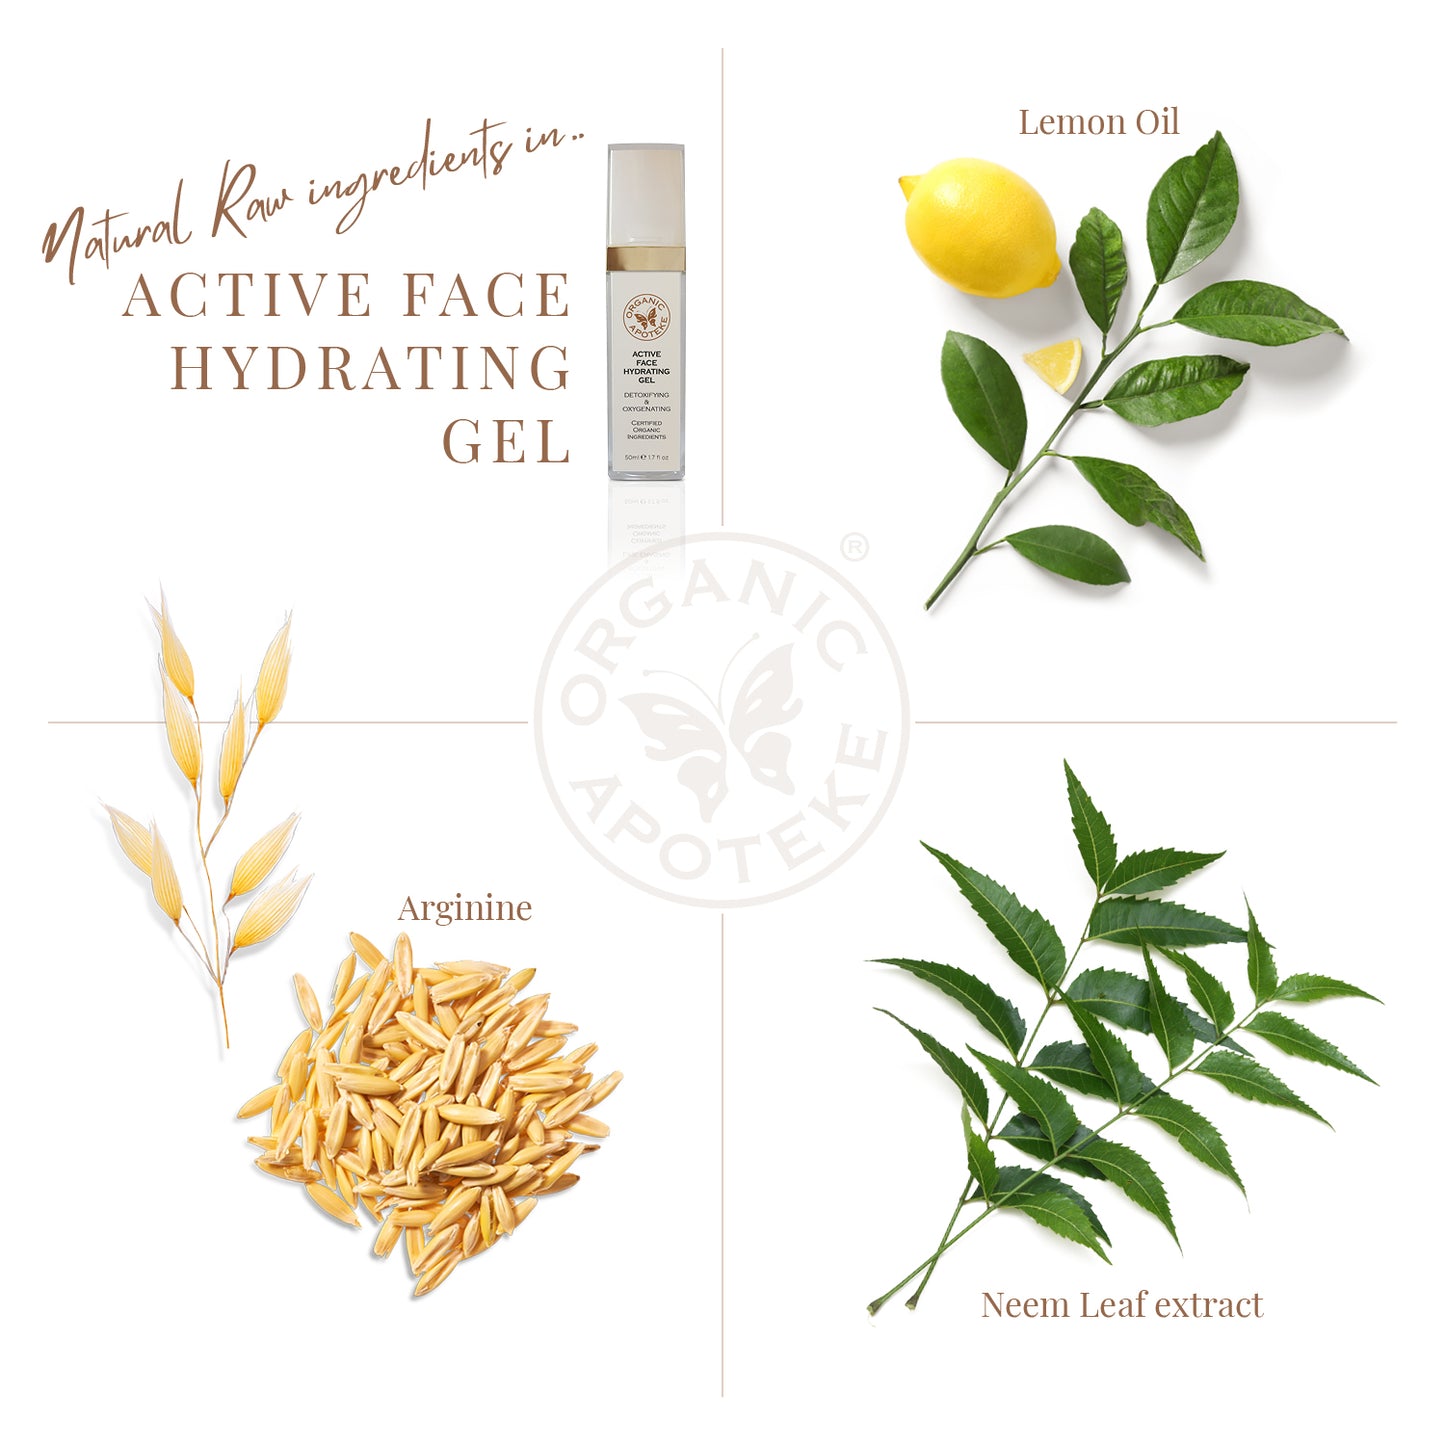 Active Face Hydrating Gel